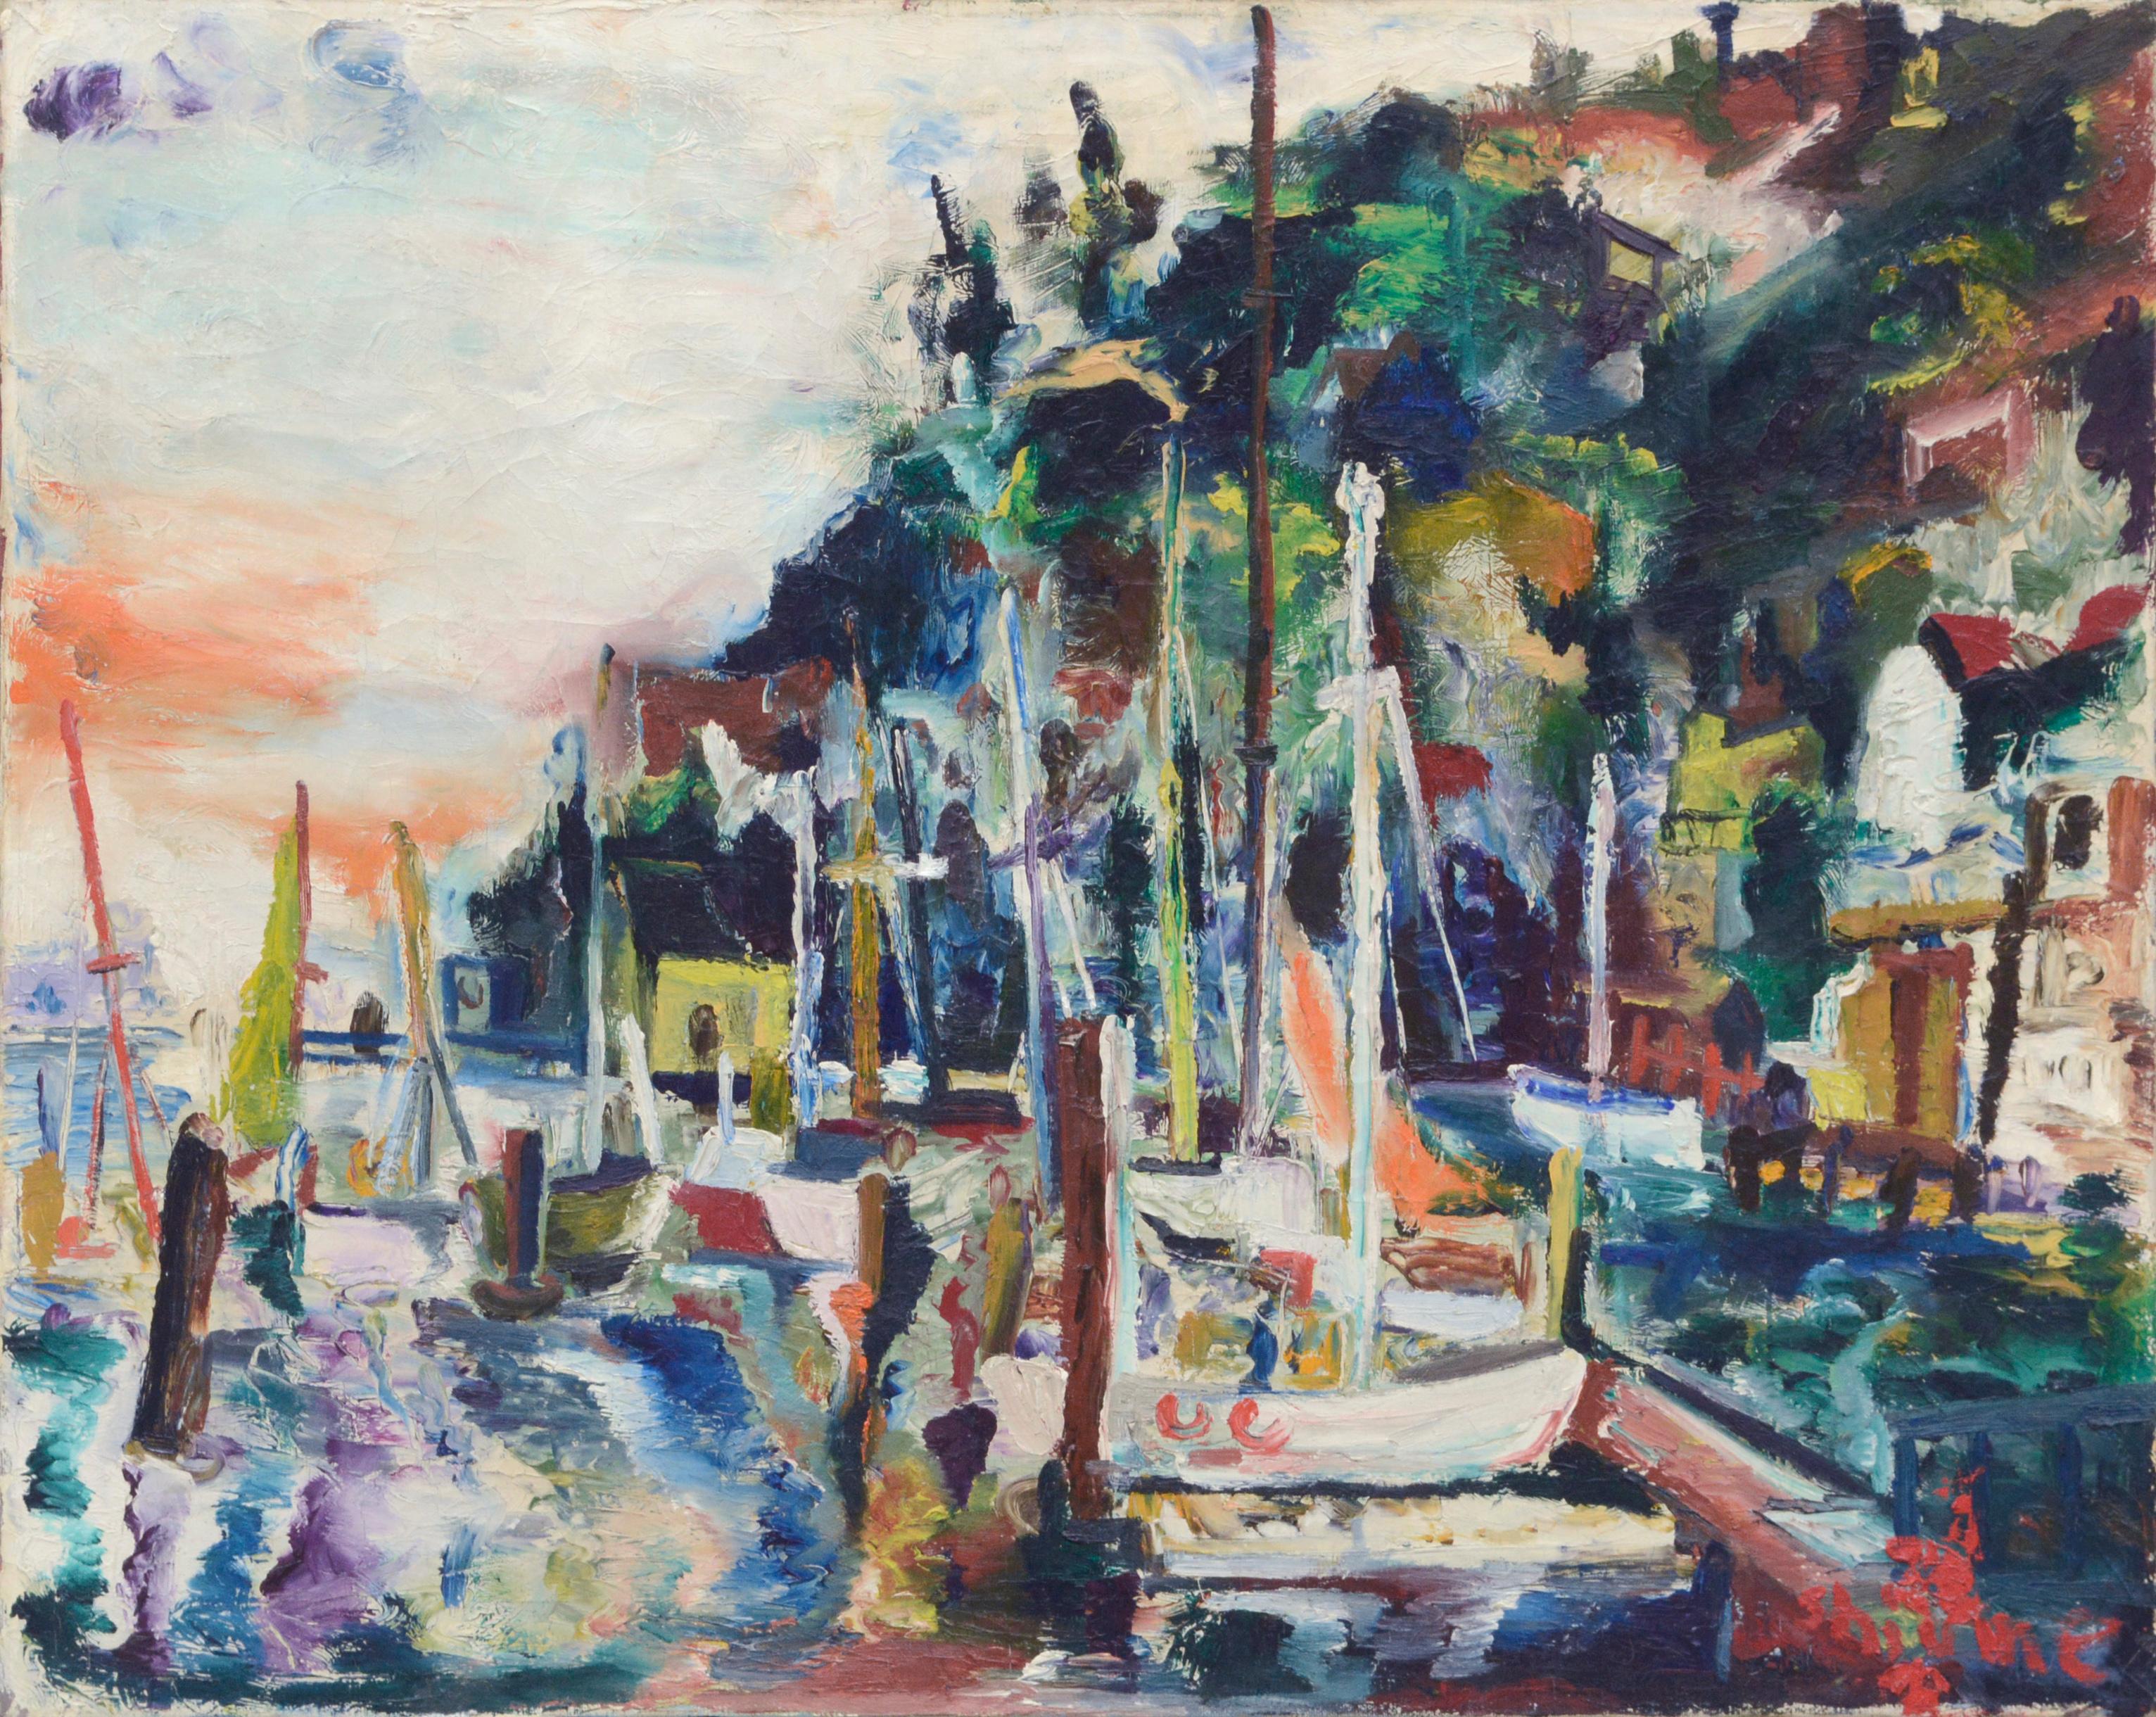 Shiume Abstract Painting - Sausalito Harbor Sailboats, MidCentury Abstract Expressionist Bay Area Seascape 